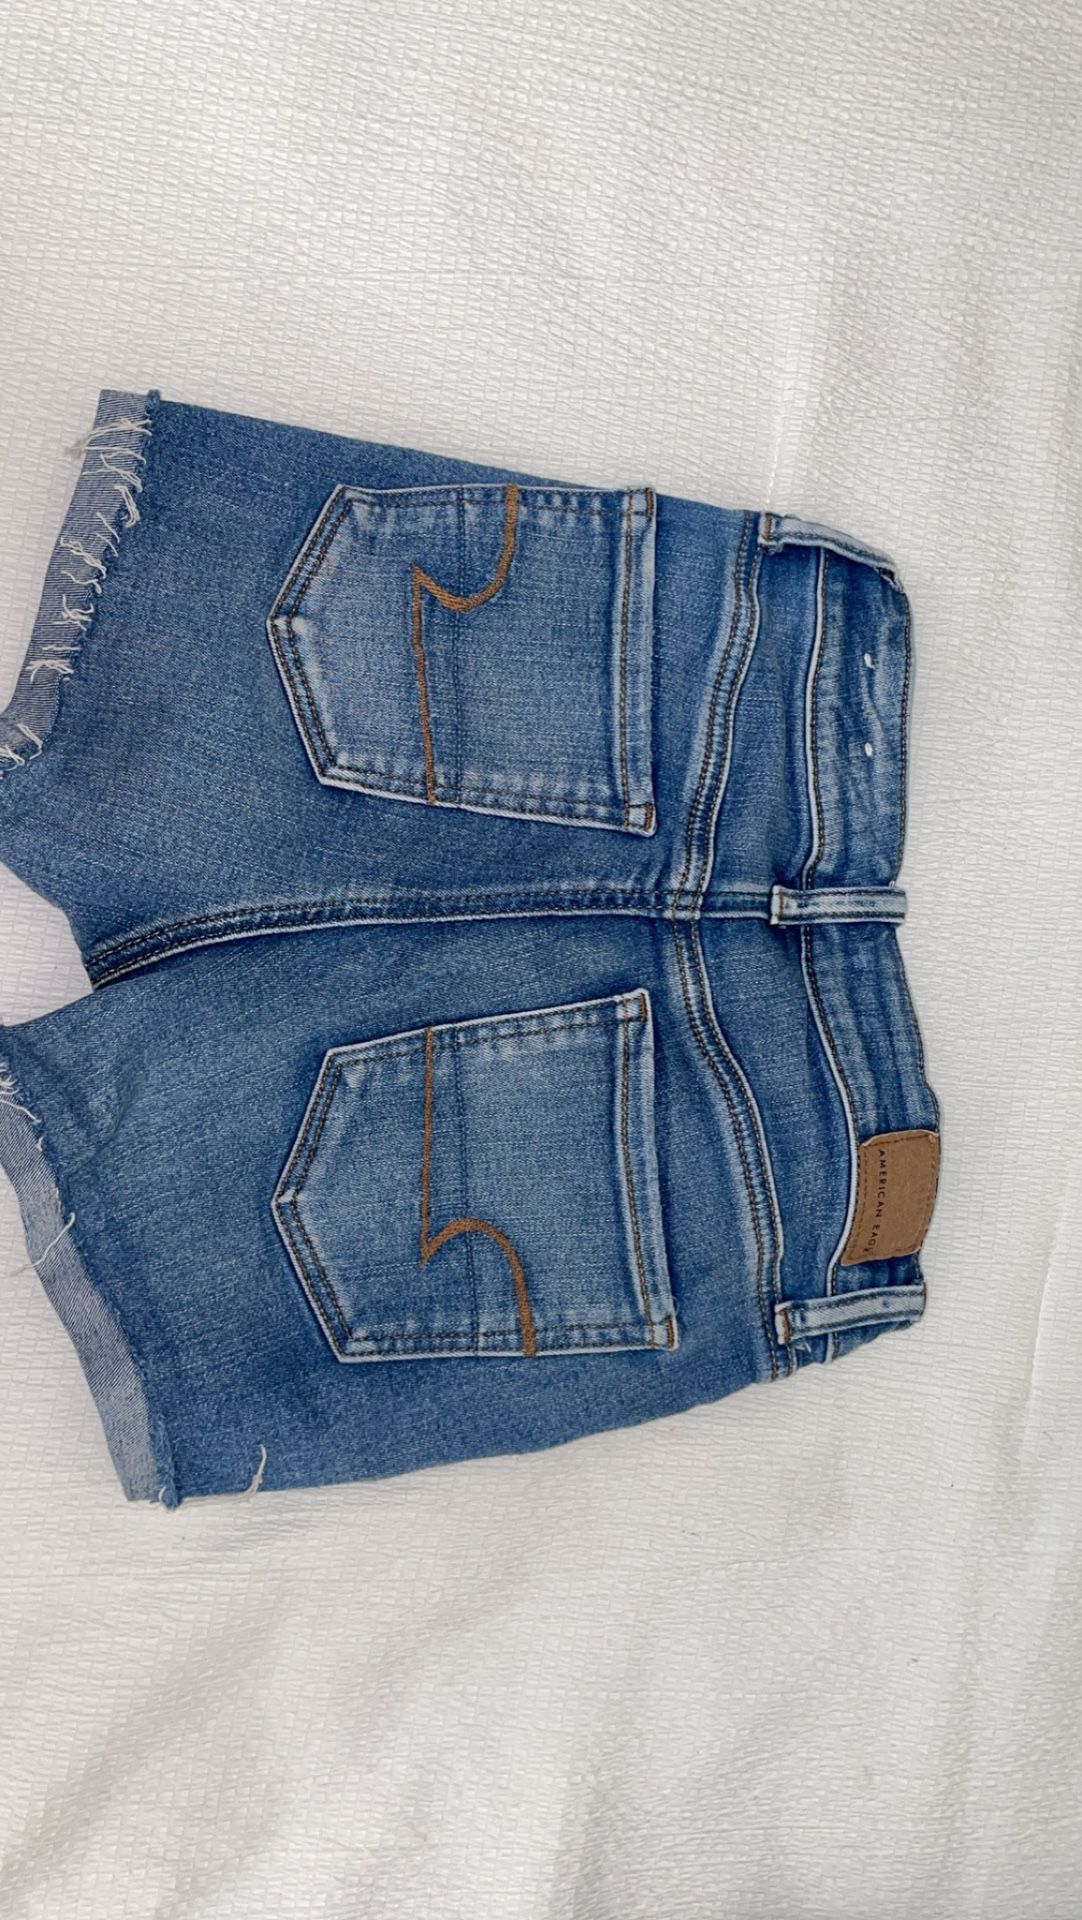 AMERICAN EAGLE JEAN SHORTS for Sale in Chicago, IL - OfferUp